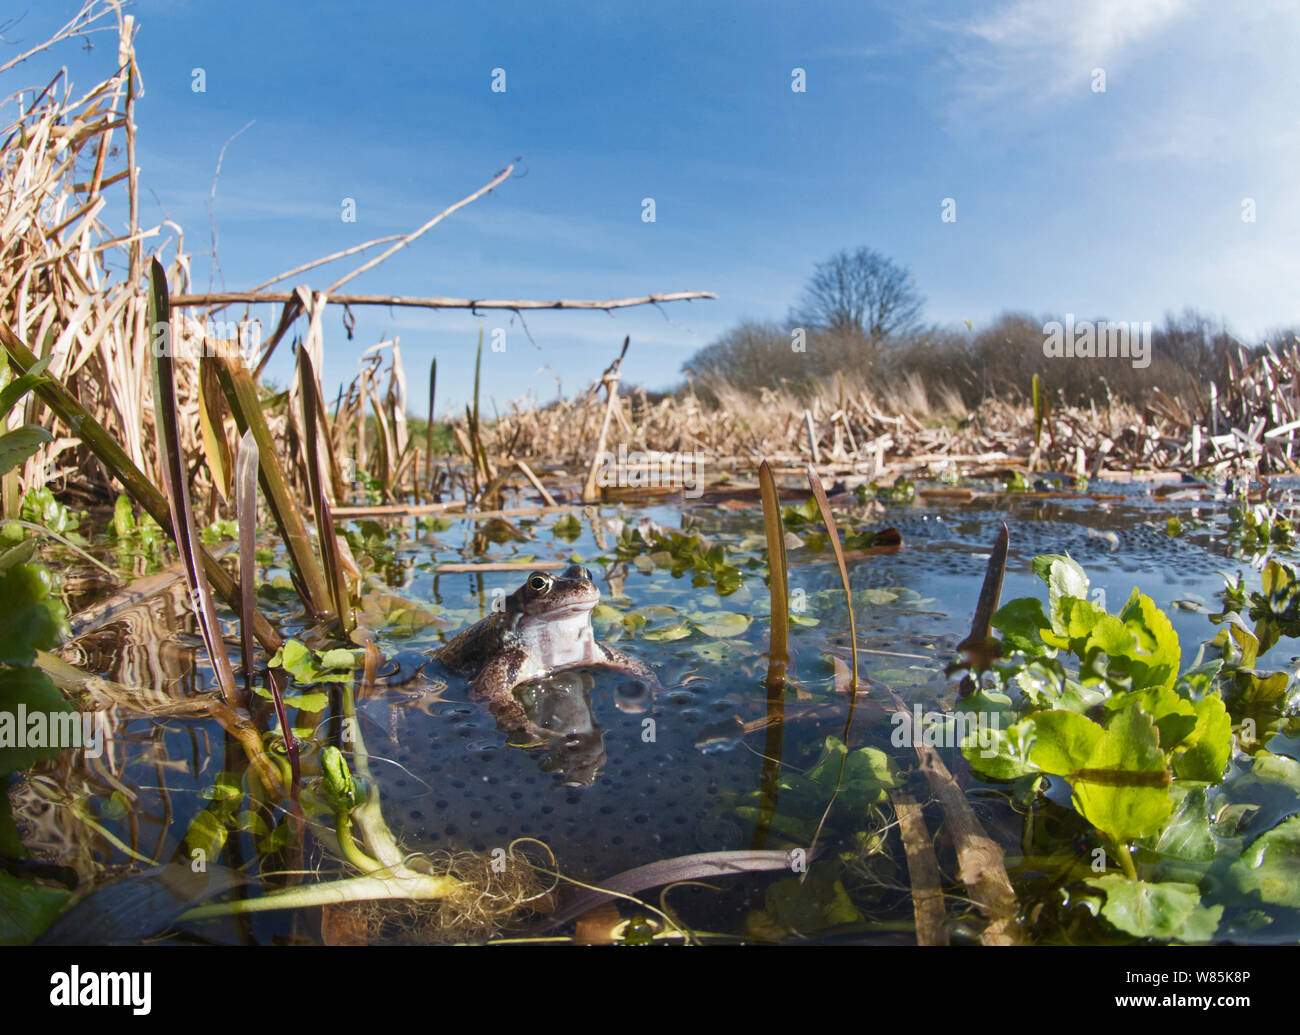 Common frogs (Rana temporaria) and spawn in pond, West Runton, North Norfolk, England, UK, March Stock Photo